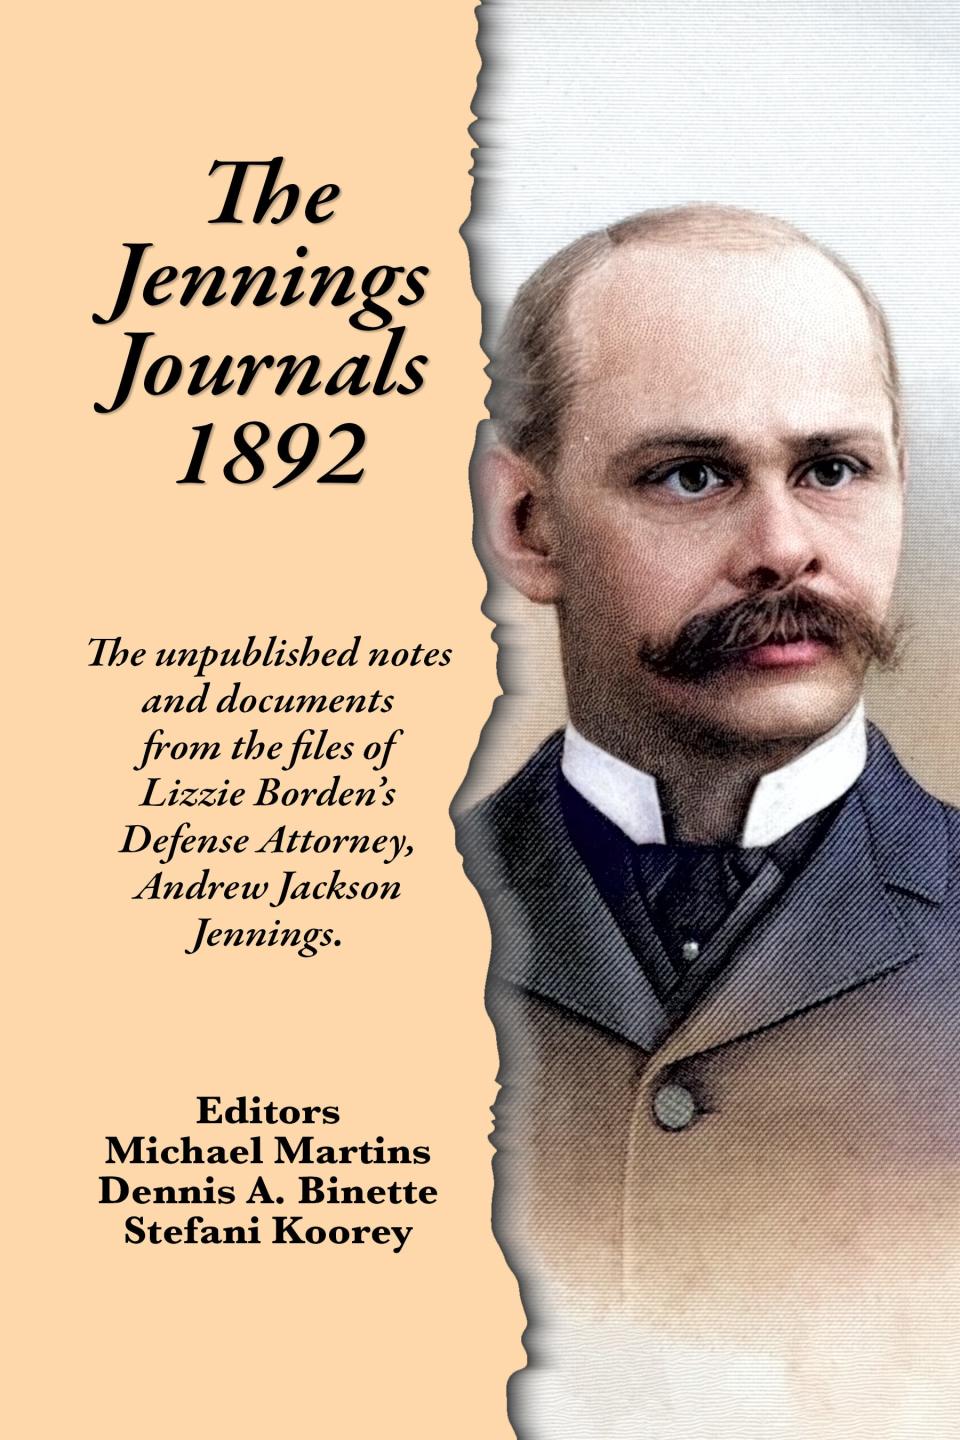 "The Jennings Journals 1892" is a collection of previously unpublished notes and documents recorded by Andrew Jackson Jennings, the defense attorney for Lizzie Borden.